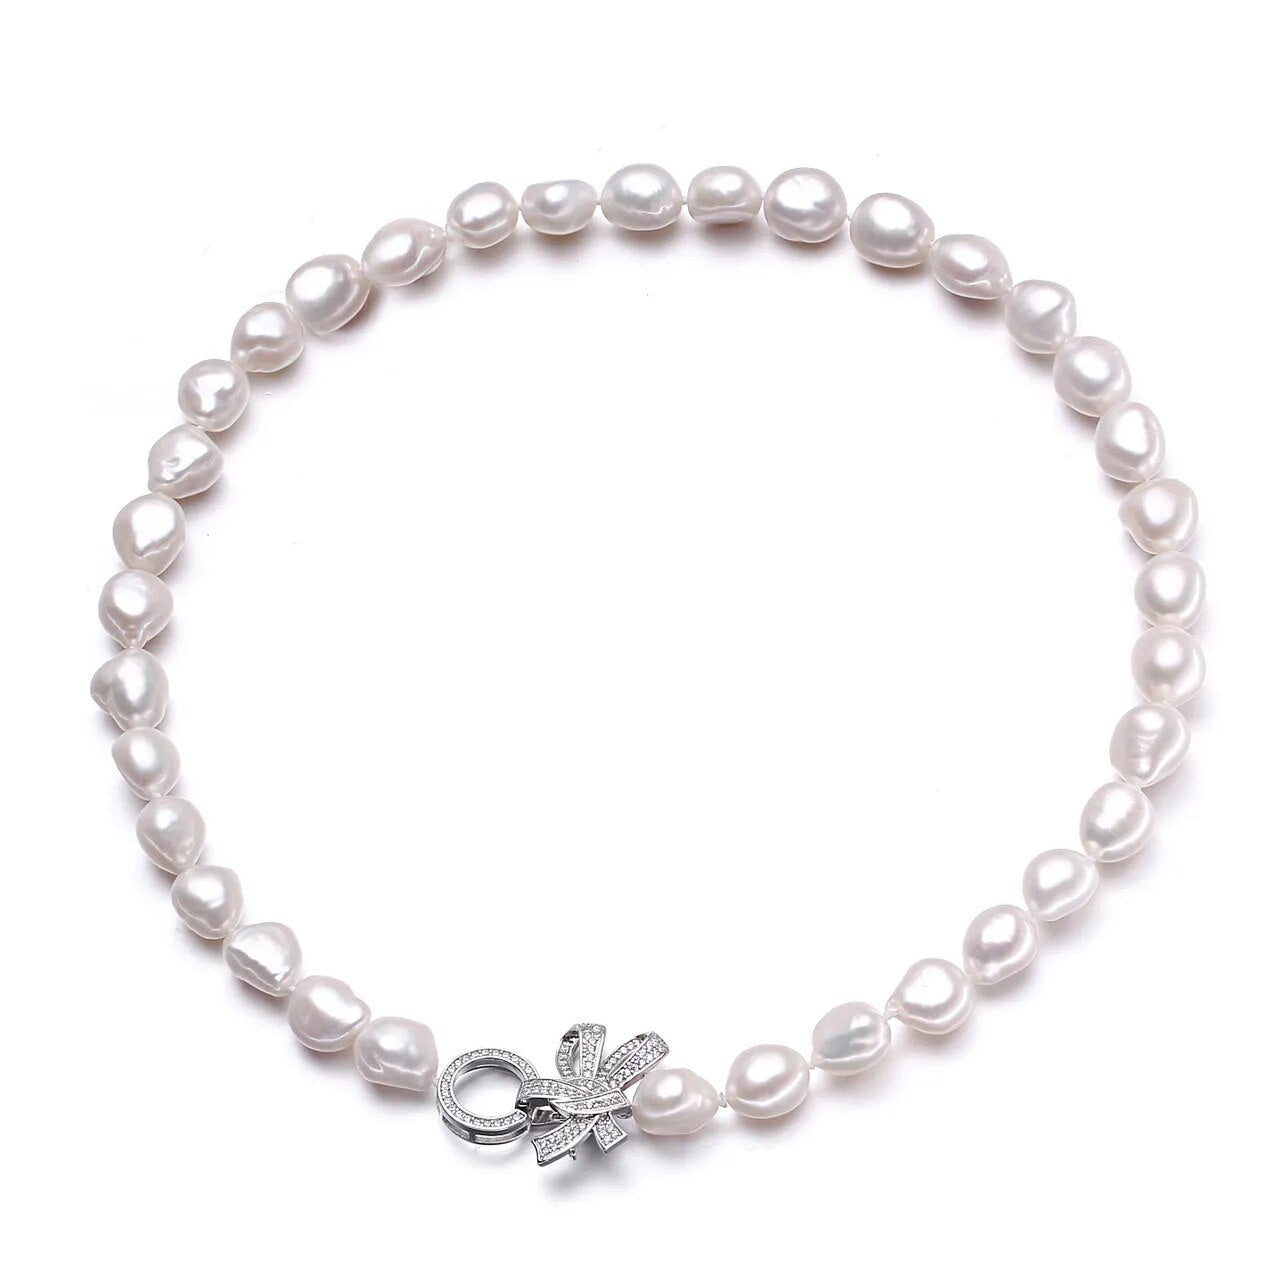 9-10mm Baroque.  White Freshwater Pearl Necklace.   Natural Flaws.   Silver Clasp.